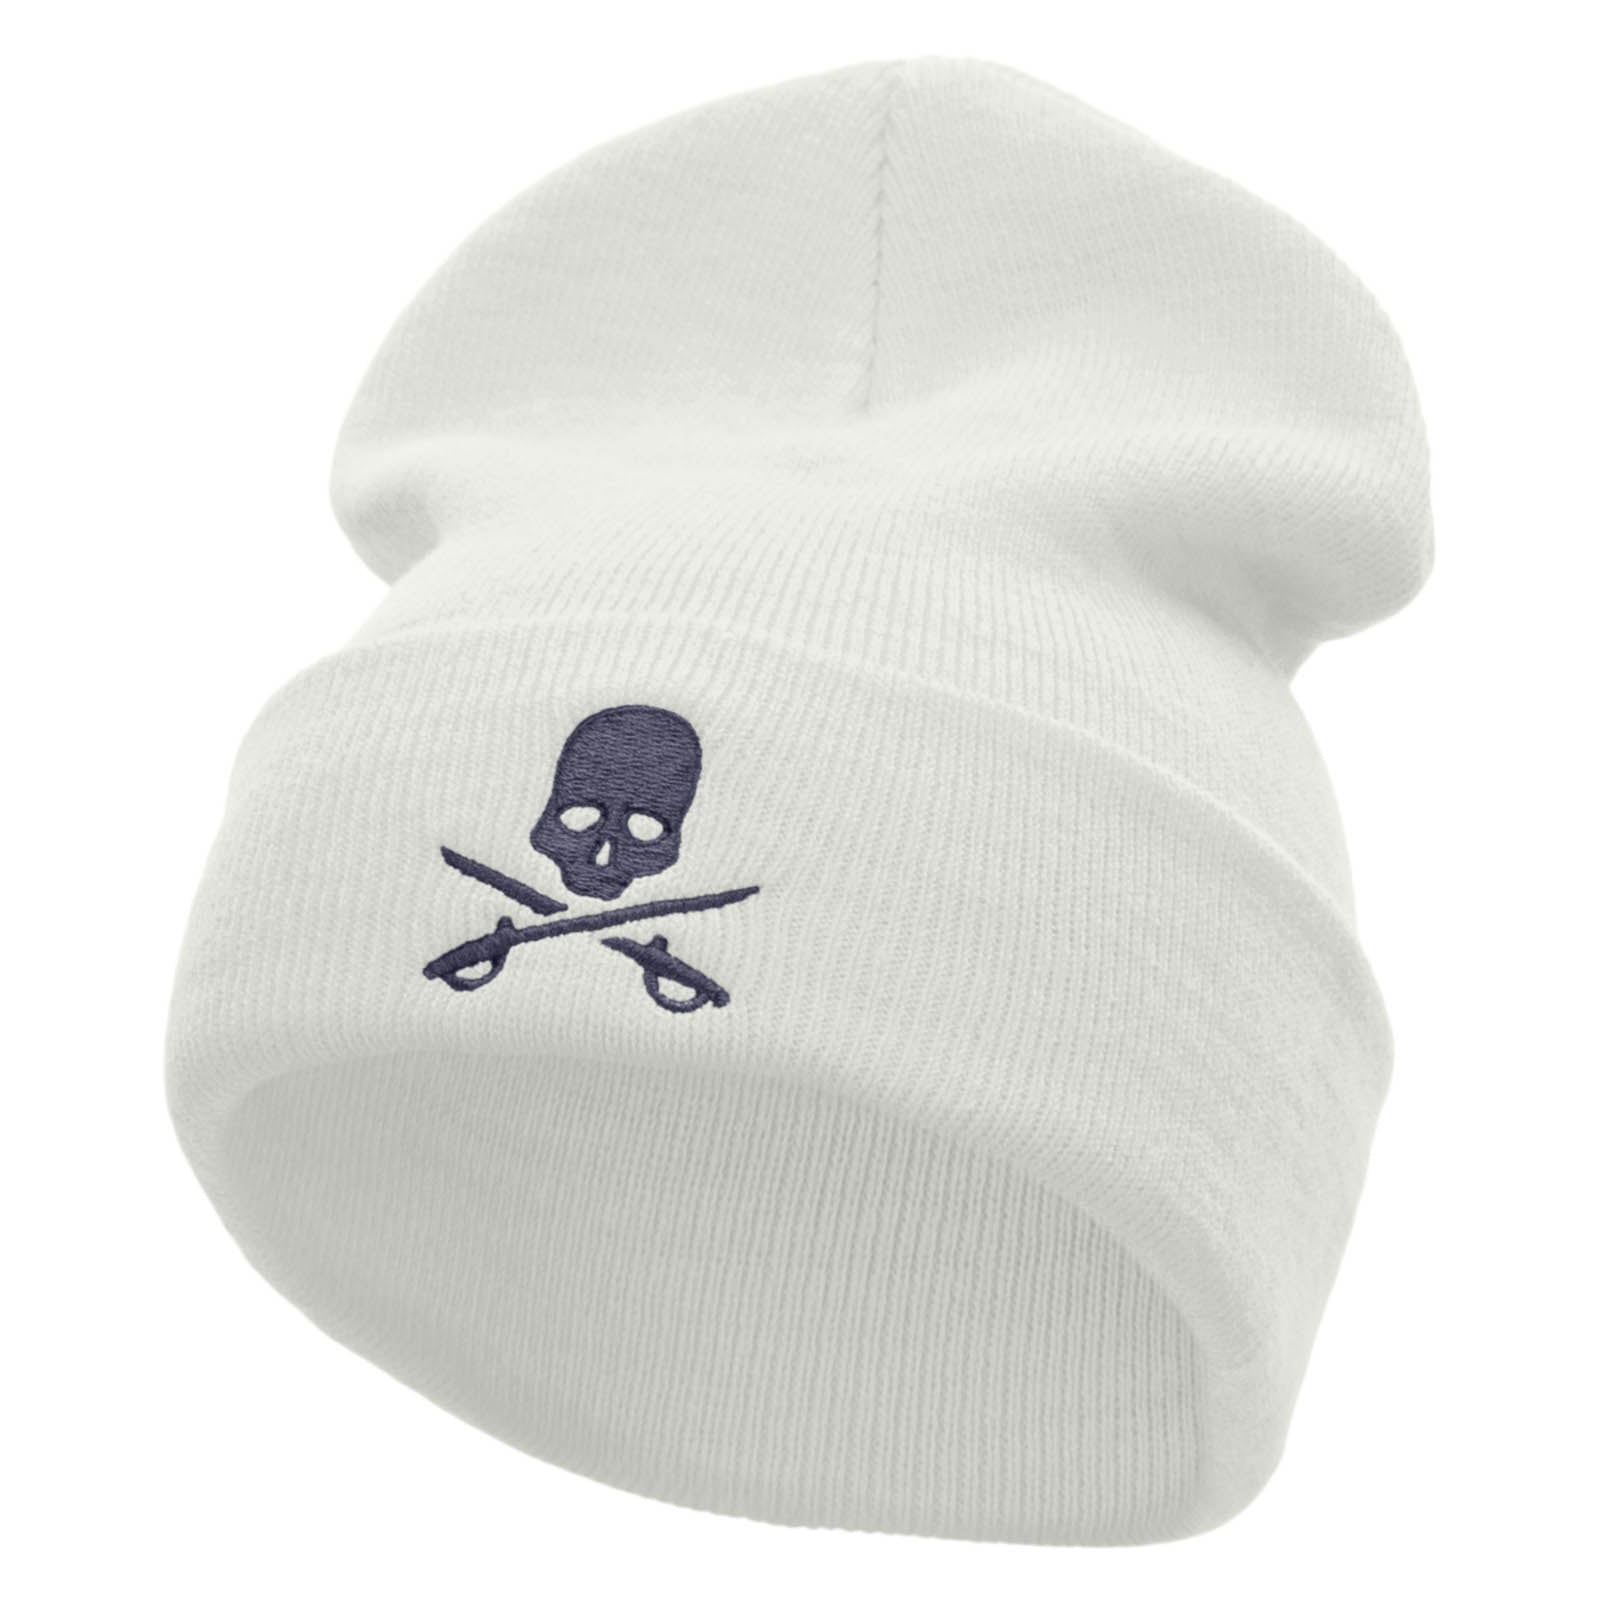 Skull And Sword Embroidered 12 Inch Long Knitted Beanie - White OSFM